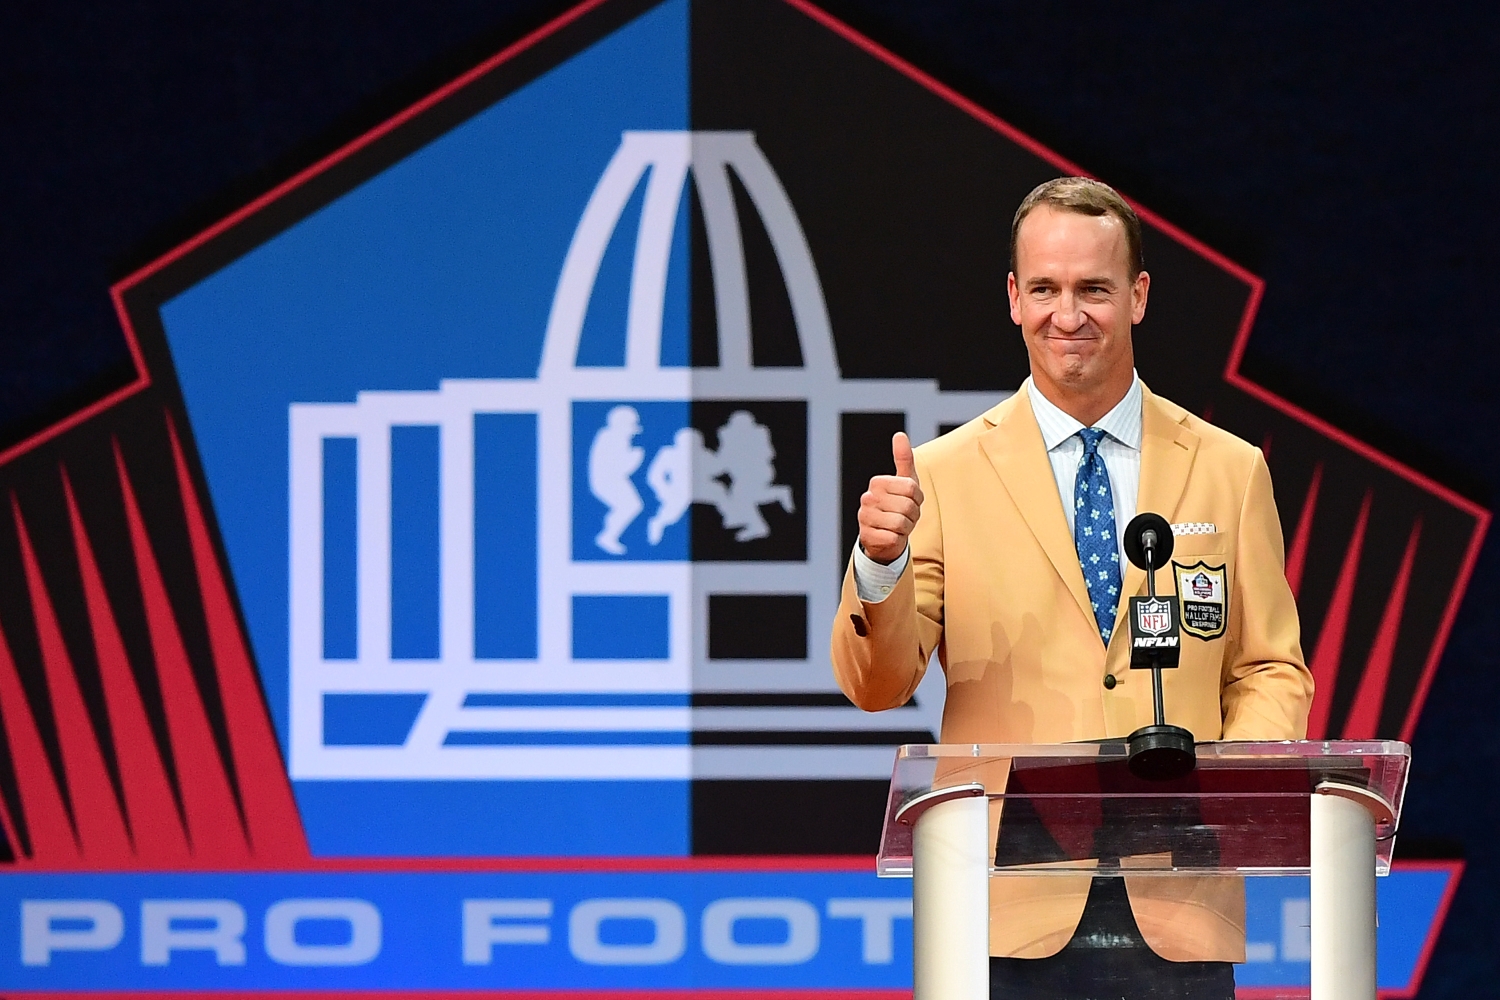 Peyton Manning reacts to the crowd during his Pro Football Hall of Fame induction ceremony speech.